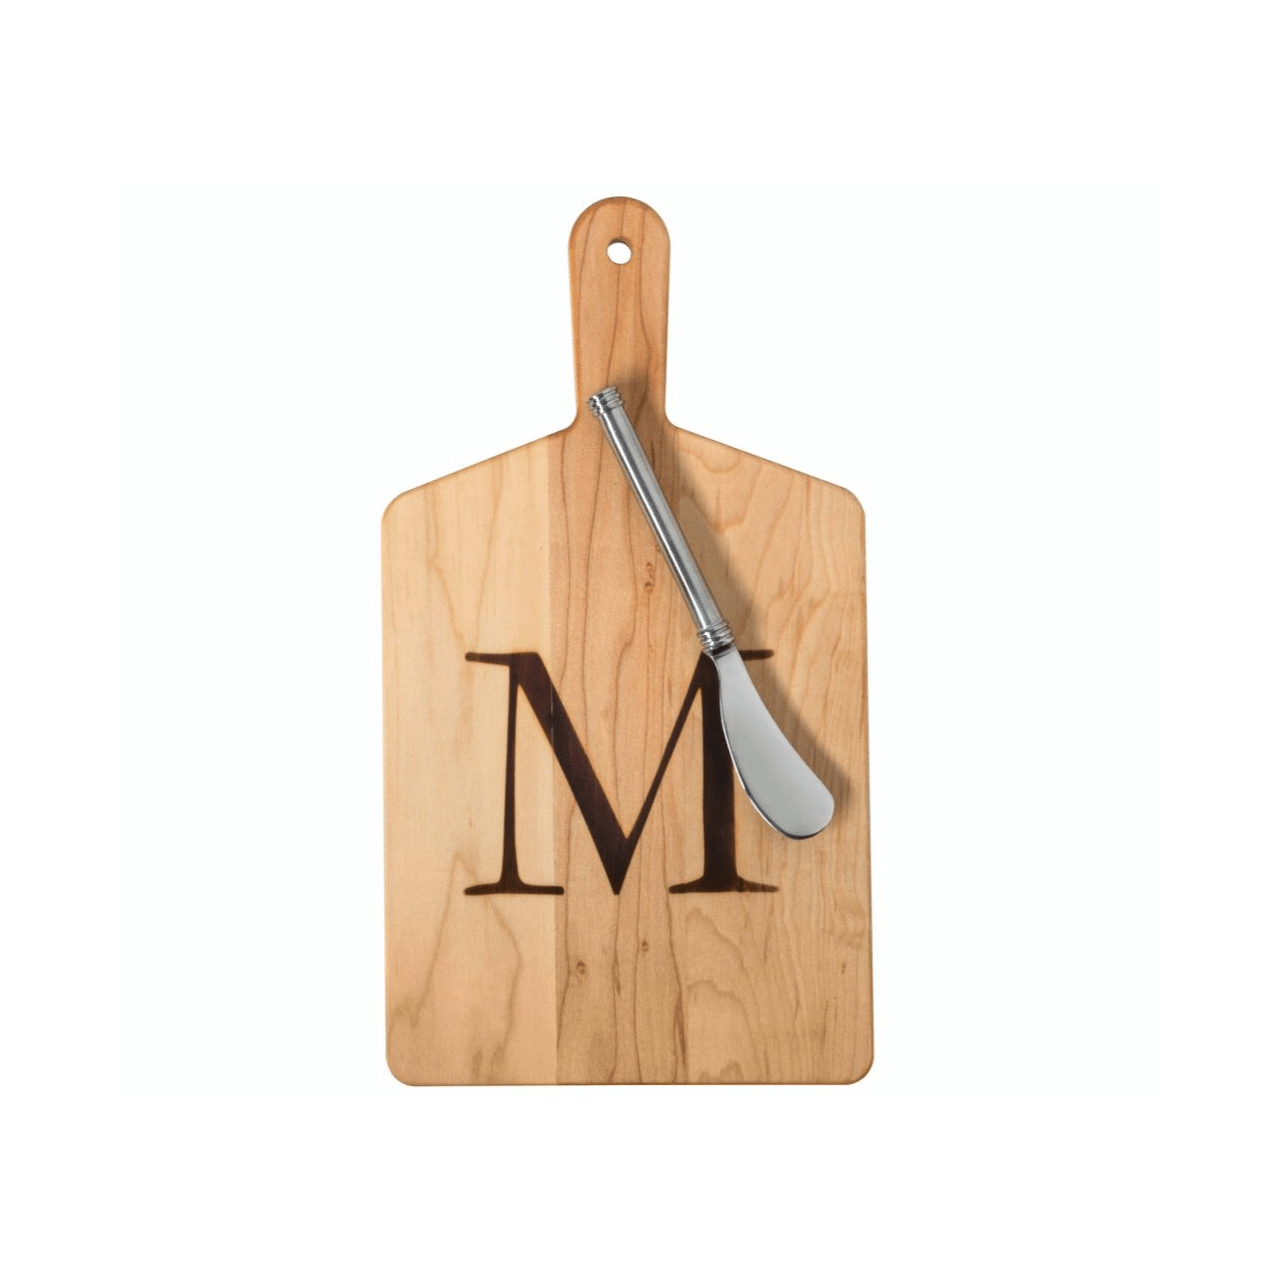 Maple Cheese Board with a Stamped F and Metal Spreader